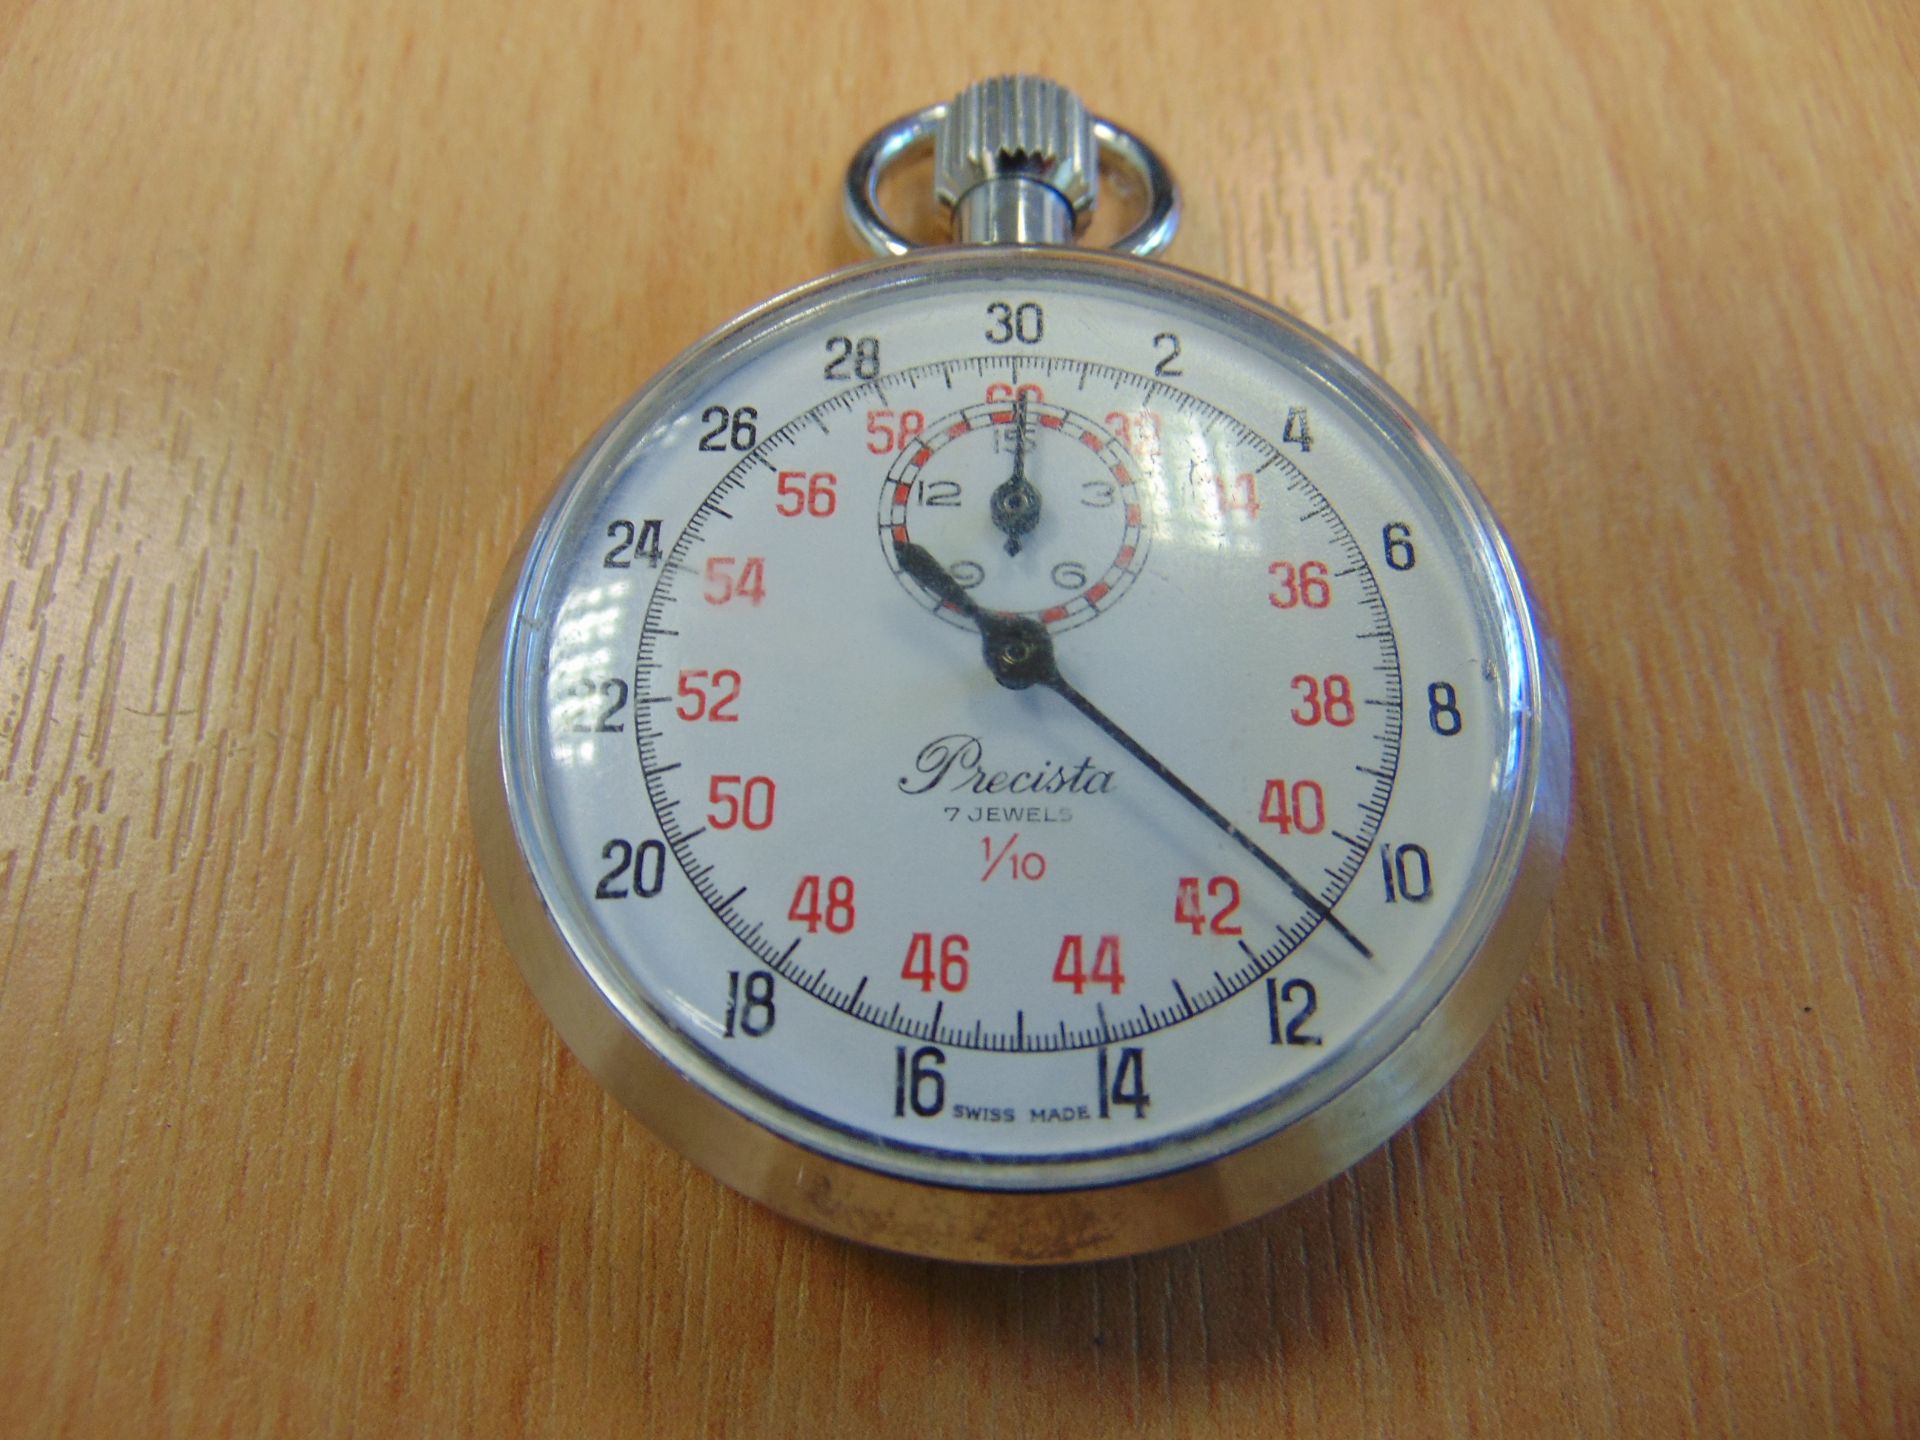 PRECISTA 1/10 SEC. 7 JEWEL STOP WATCH Dated 1988. Nato Narked - Image 2 of 5